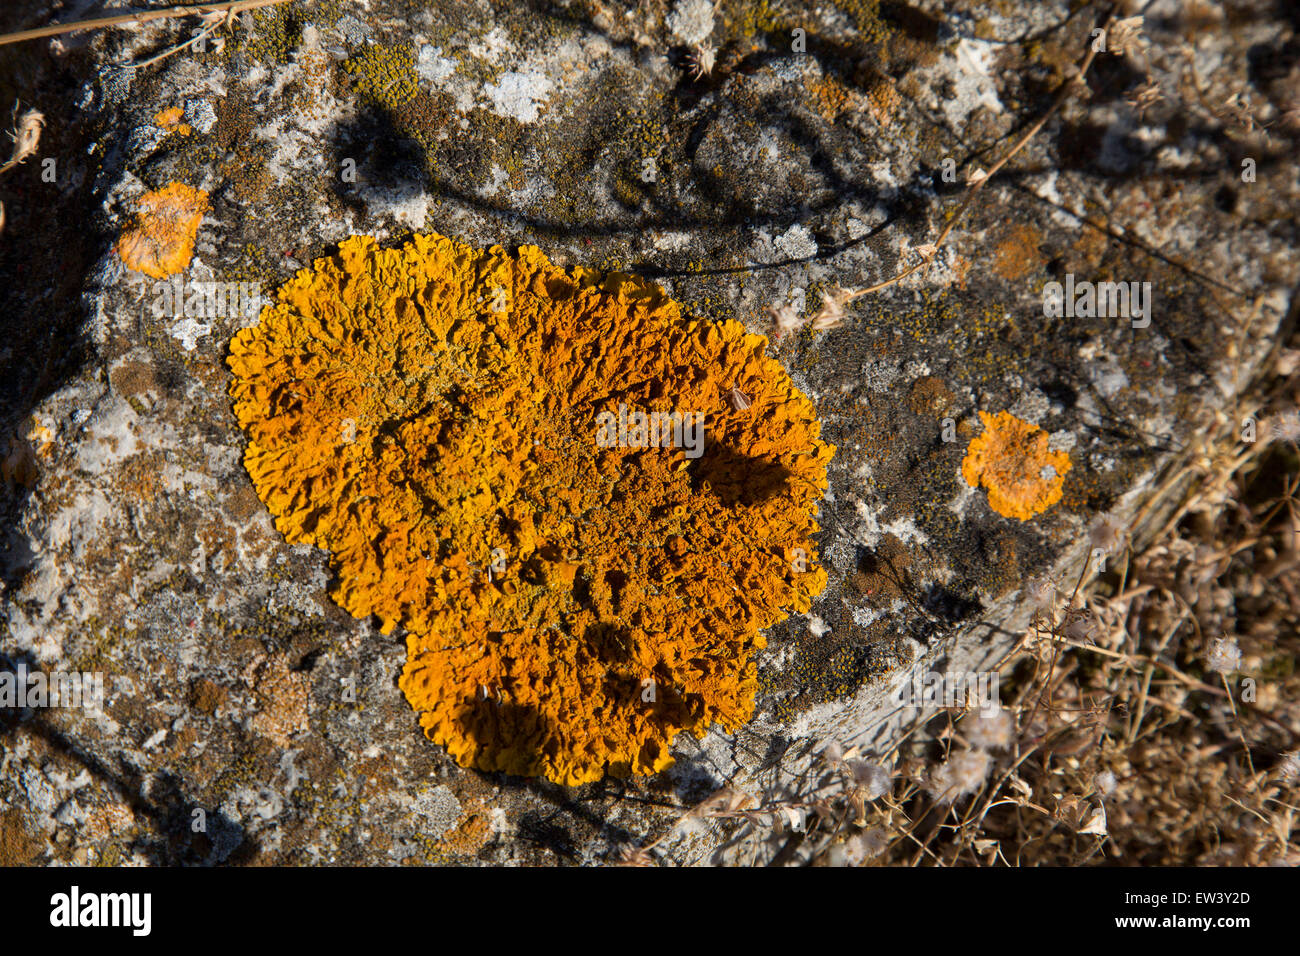 Orange lichen on a rock at Gruissan, Languedoc-Roussillon, France. A lichen is a composite organism that arises from algae or cyanobacteria (or both) living among filaments of a fungus in a mutually beneficial relationship (symbiotoc relationship). The whole combined life form has properties that are very different from properties of its component organisms. Lichens come in many colors, sizes, and forms. The properties are sometimes plant-like, but lichens are not plants. Stock Photo